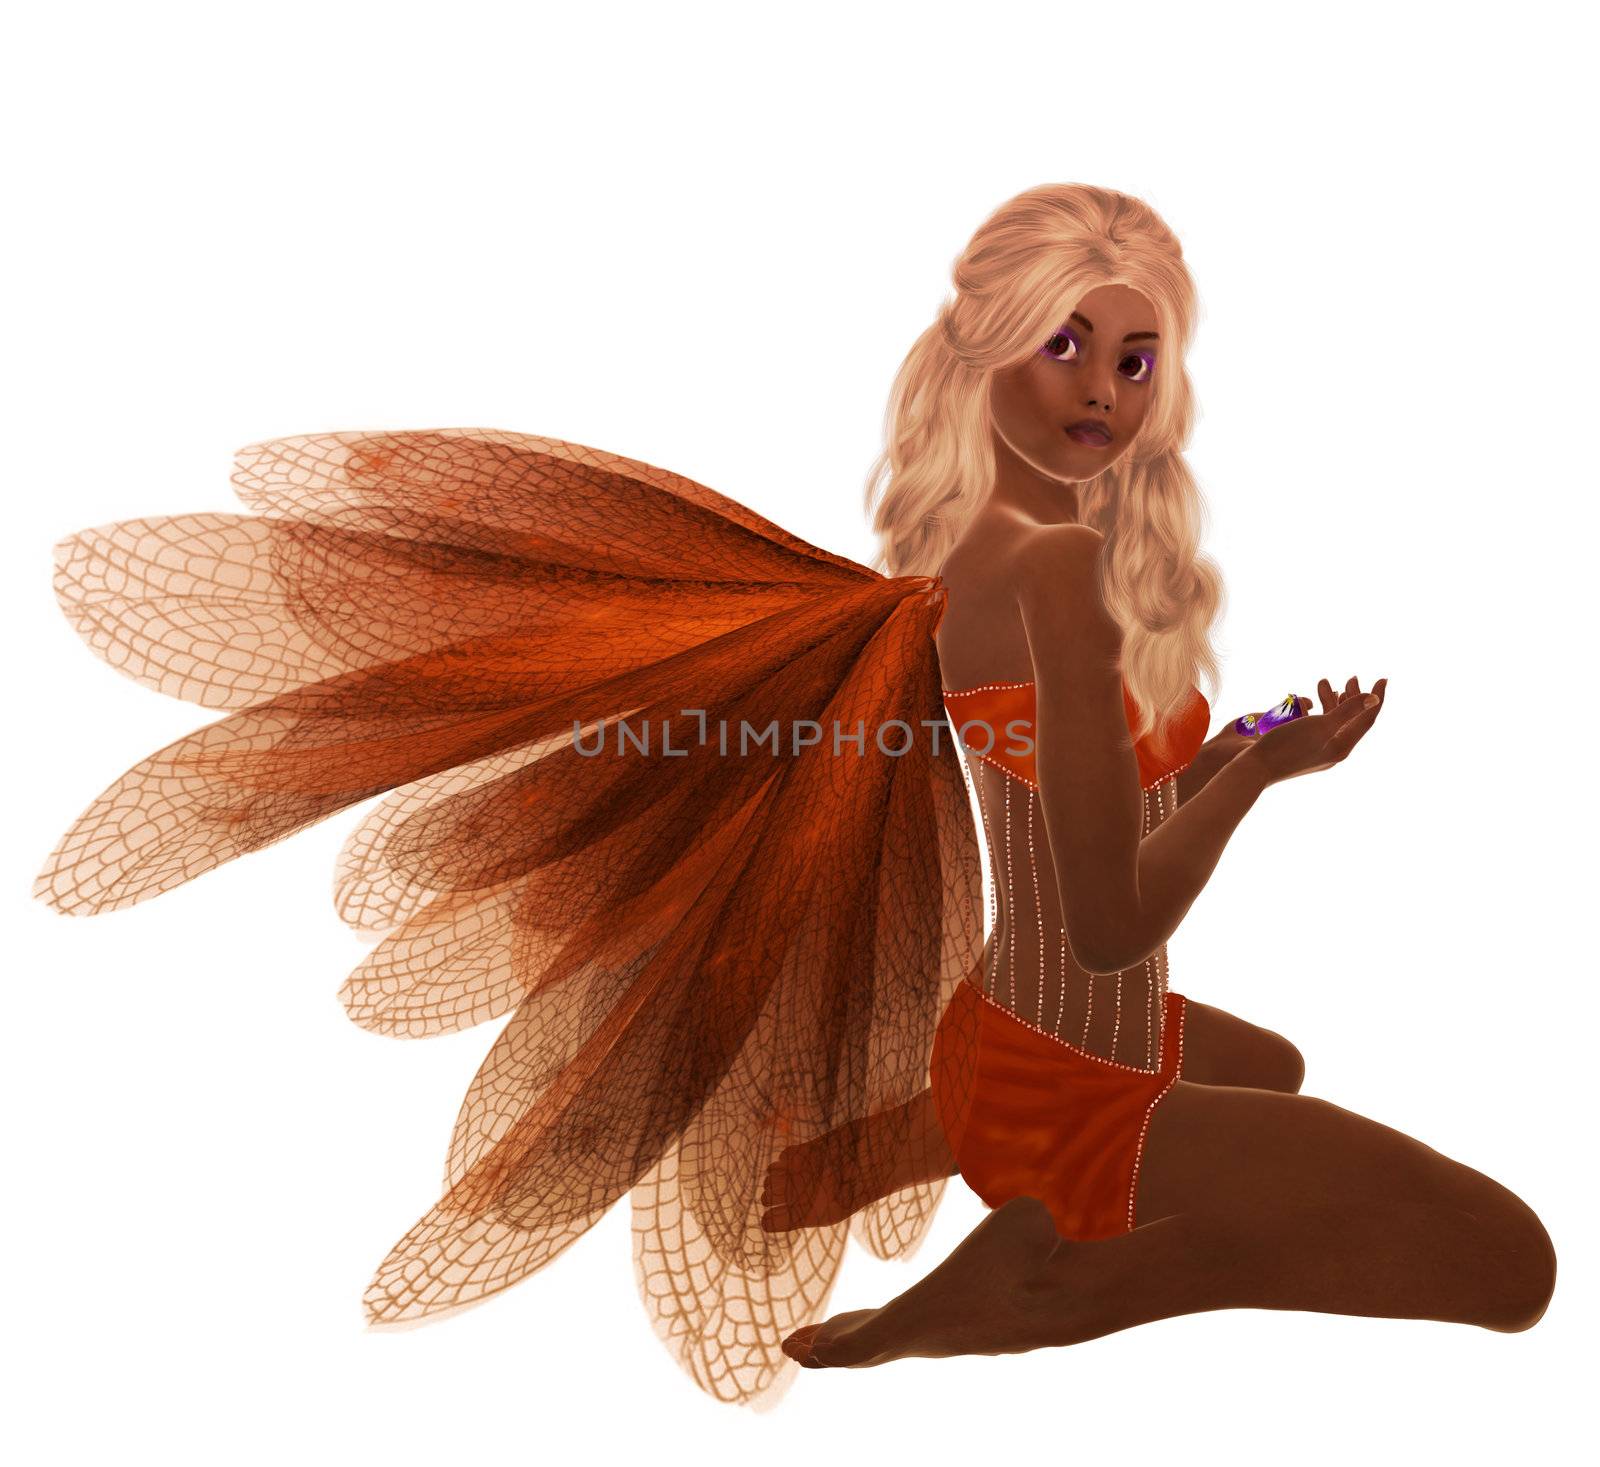 Orange fairy with blonde hair, sitting holding flowers in her hand